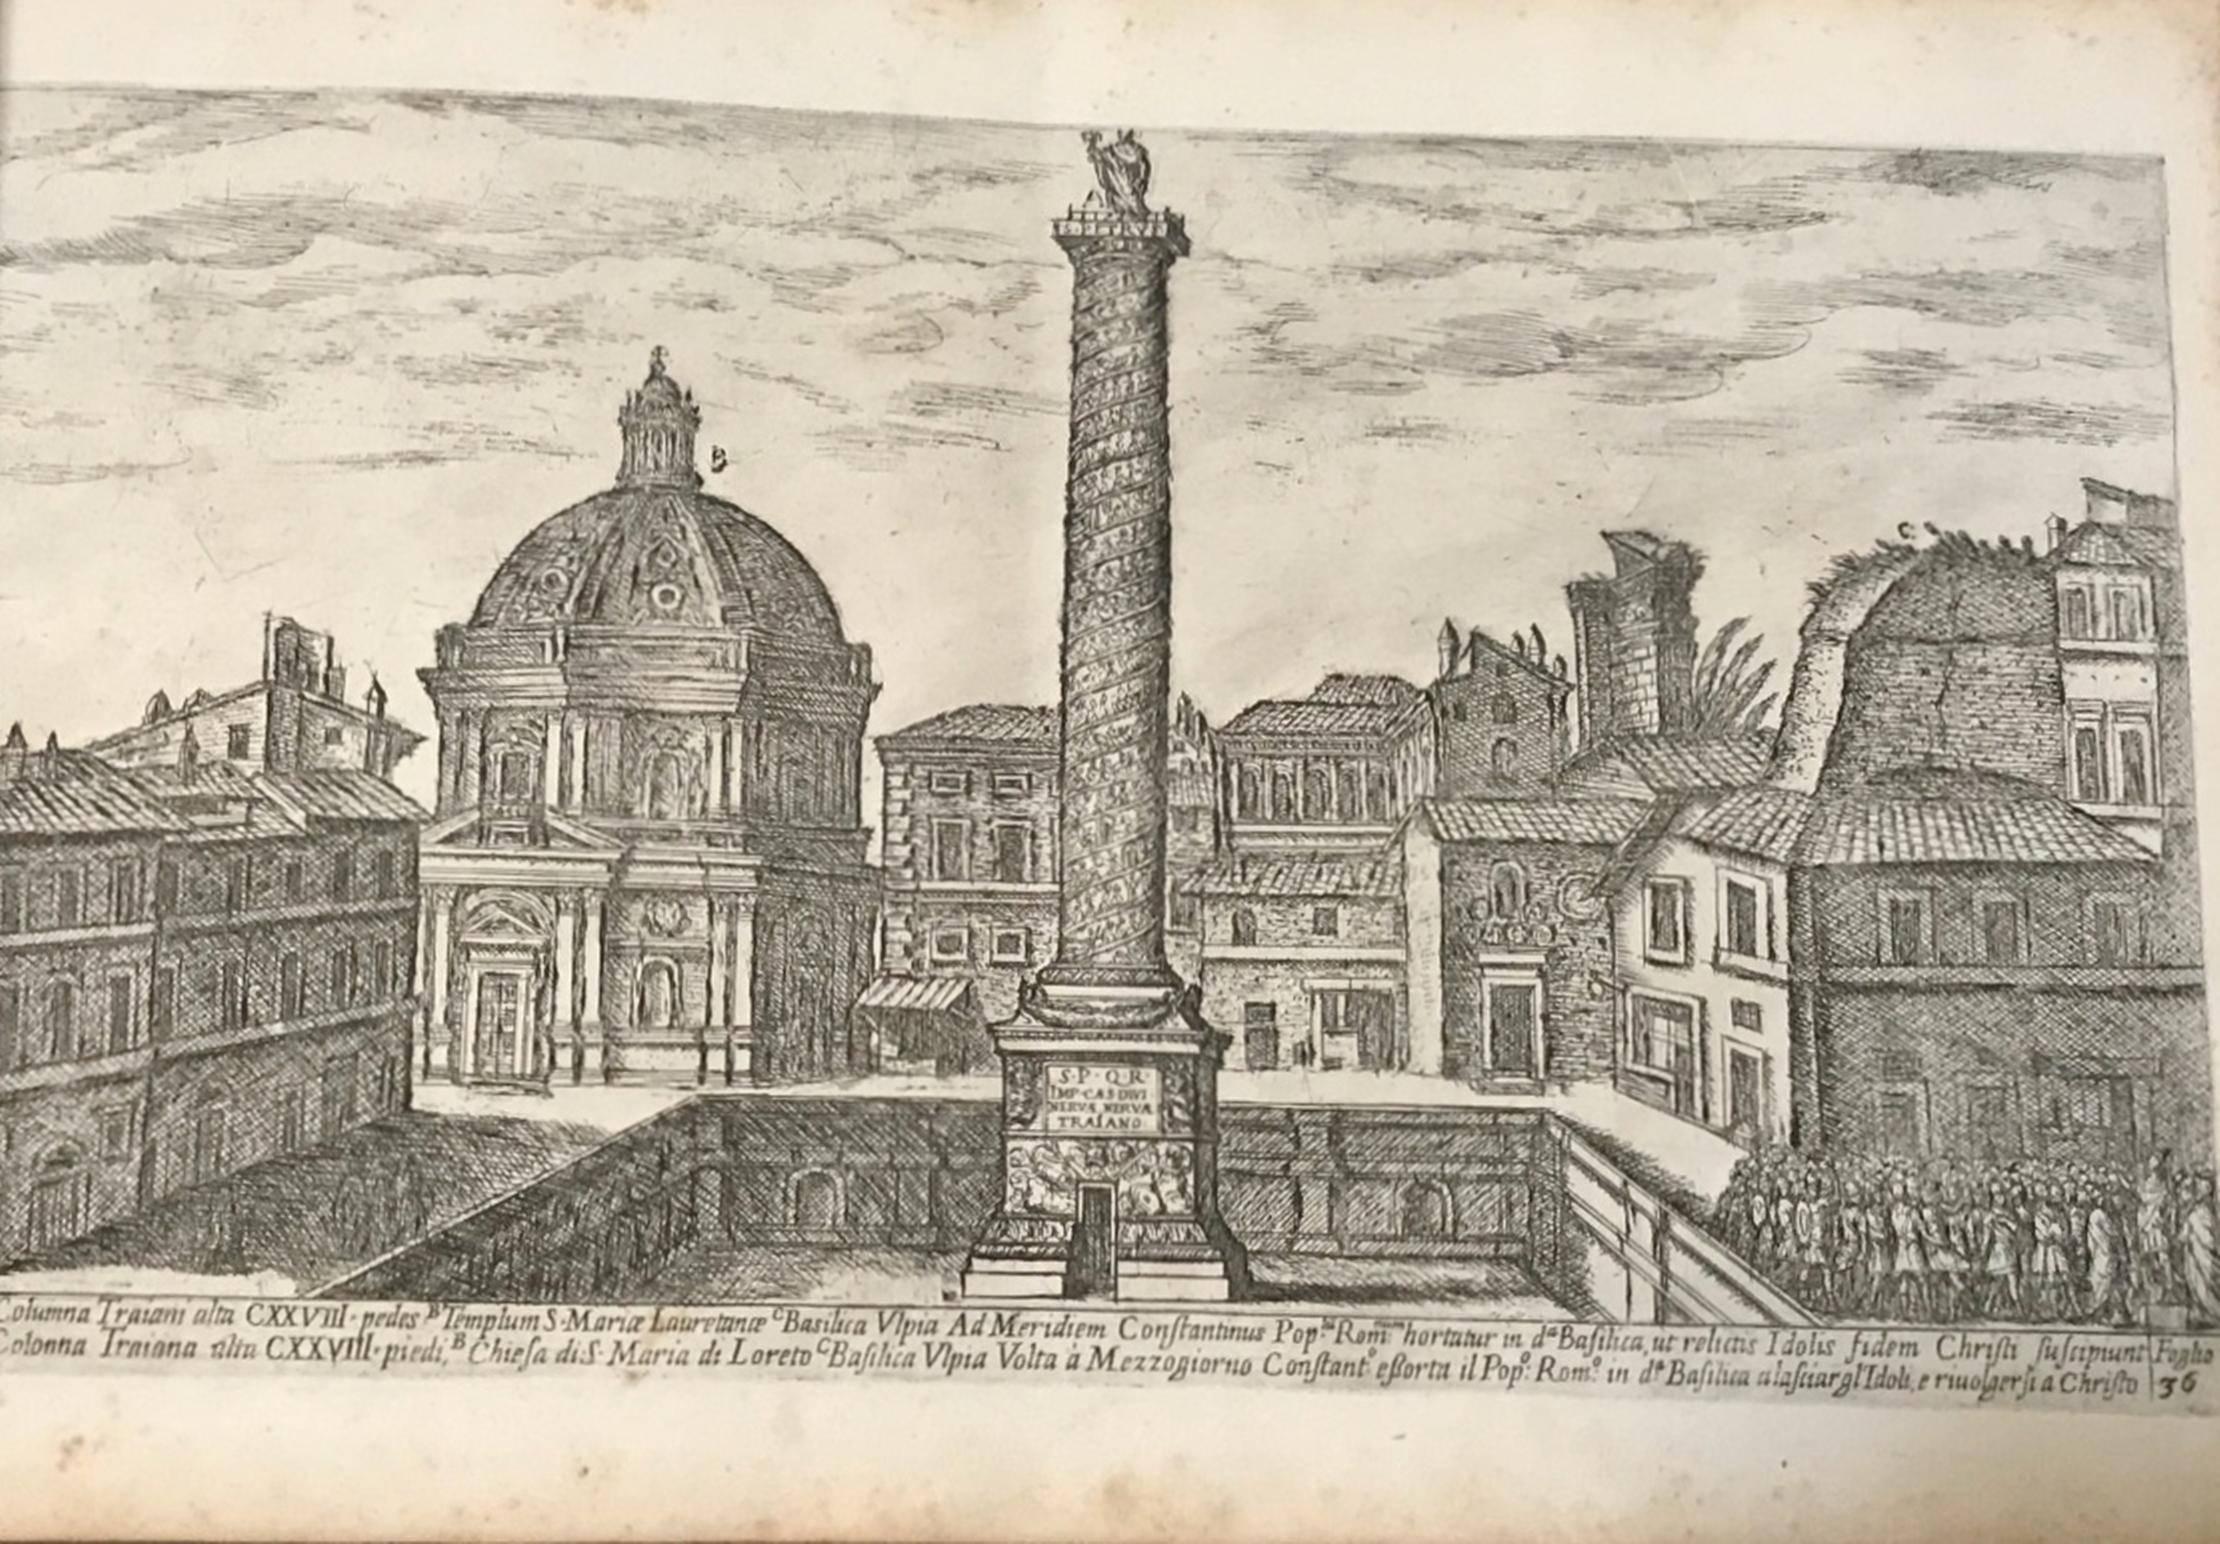 Views of the Ancient Vestiges of Rome  - Old Masters Print by Alò Giovannoli